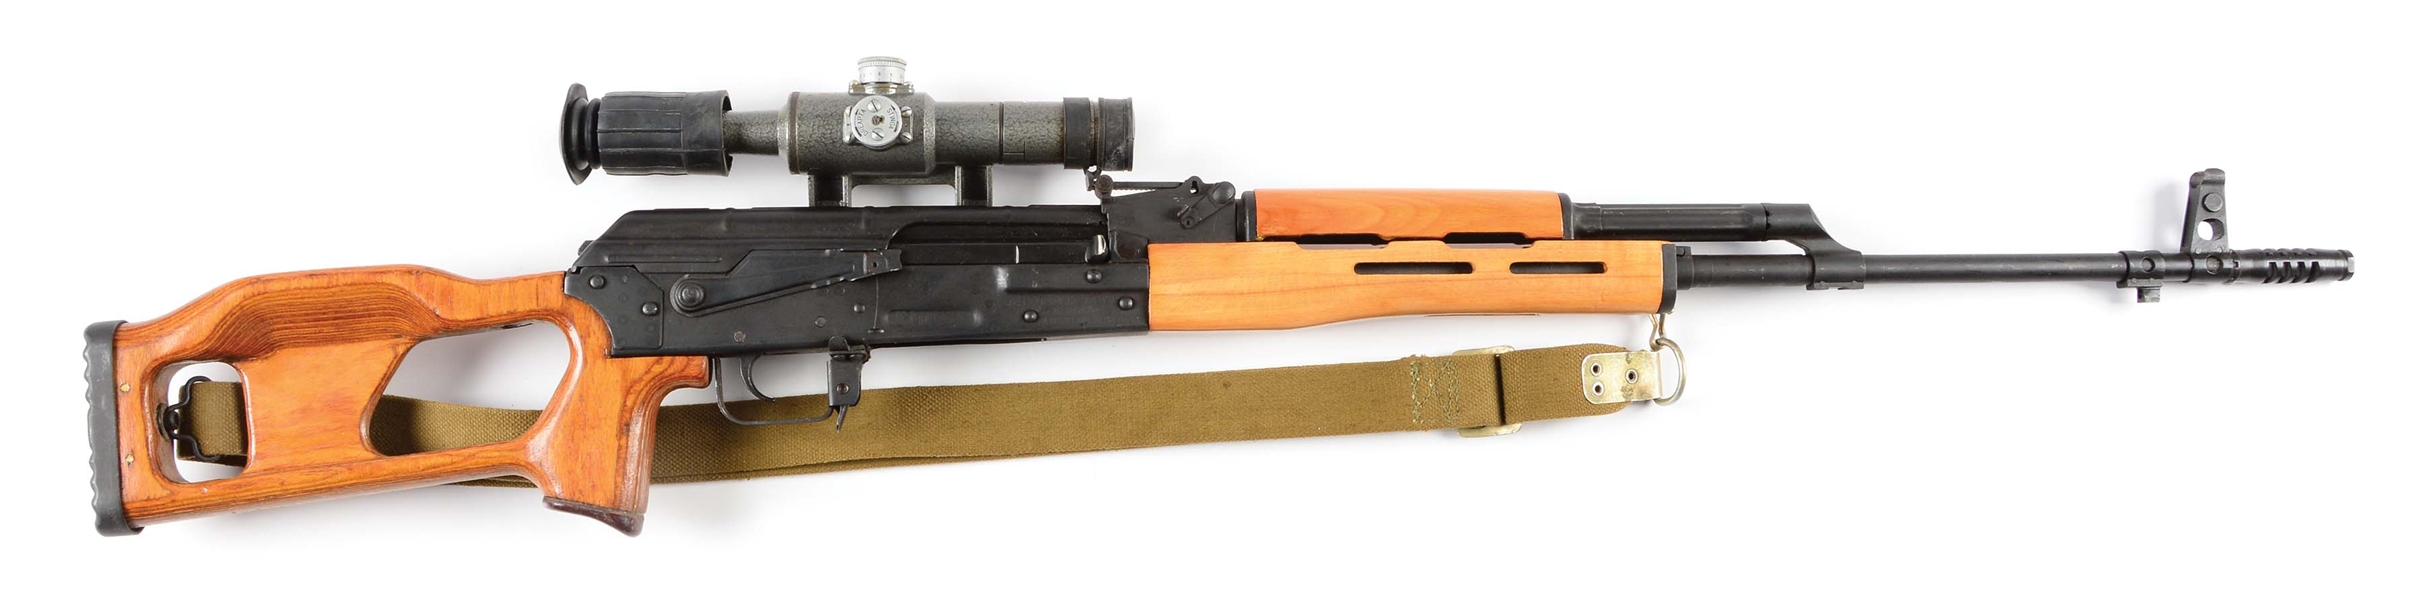 (M) ROMANIAN PSL-54C DRAGONUV STYLE SNIPER RIFLE WITH SCOPE.